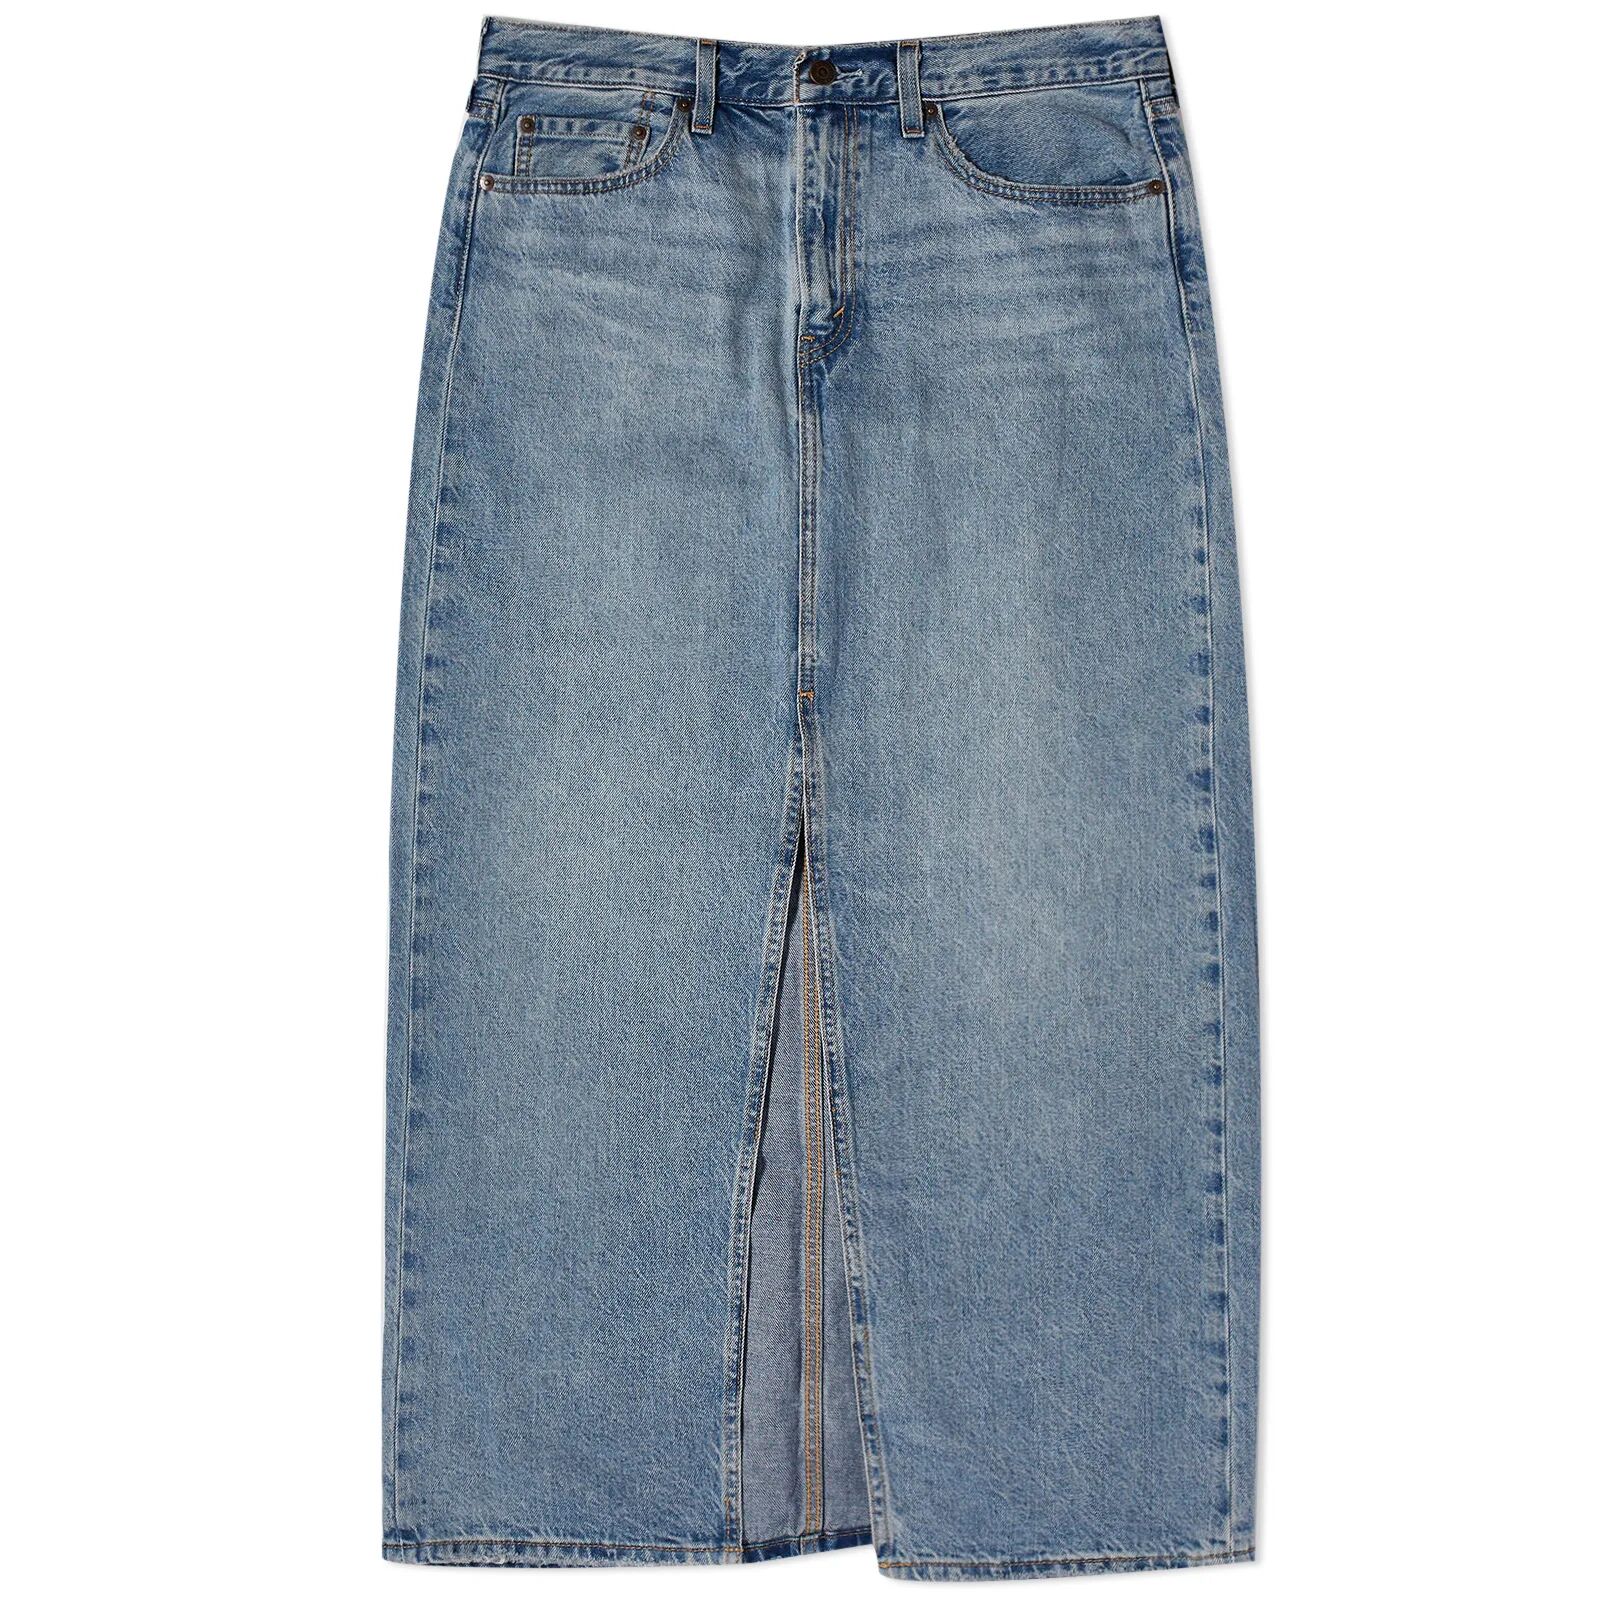 Levi’s Collections Women's Levis Vintage Clothing Ankle Column Skirt in Please Hold, Size 29"